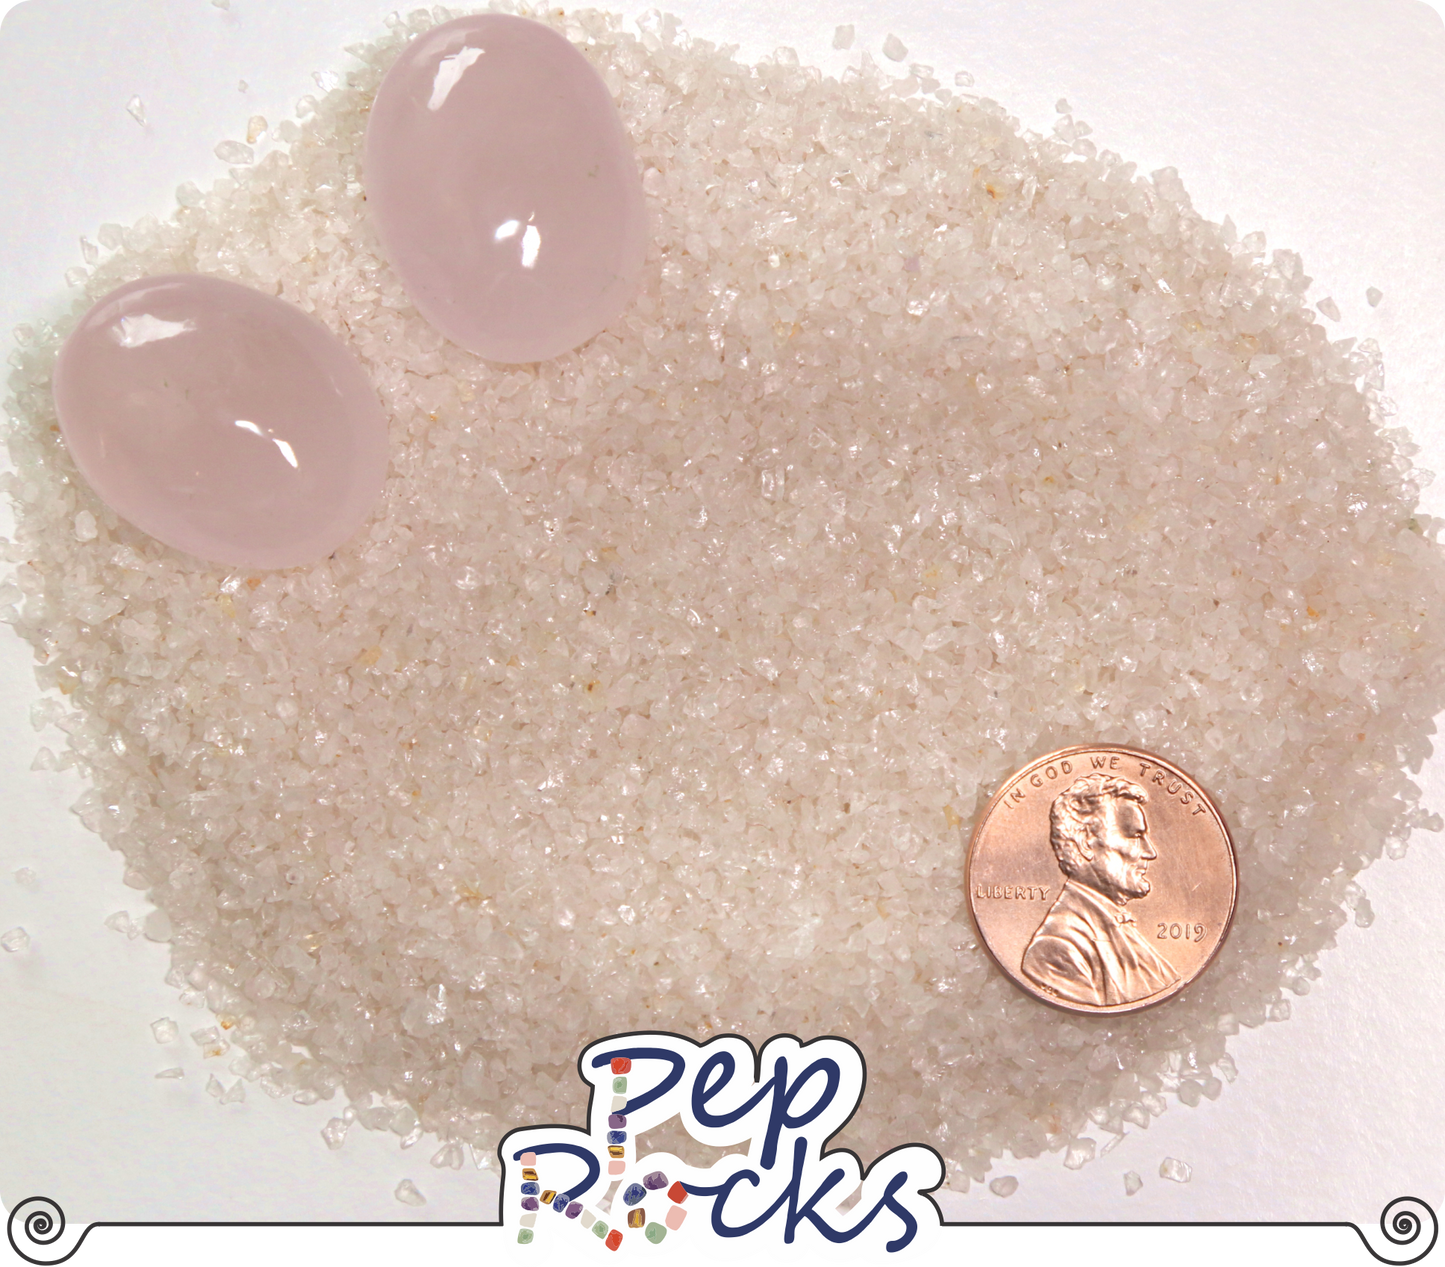 Rose Quartz - Crushed Coarse Gemstone Sand. Great for Art, Jewelry, Wood Inlay and Metaphysical uses